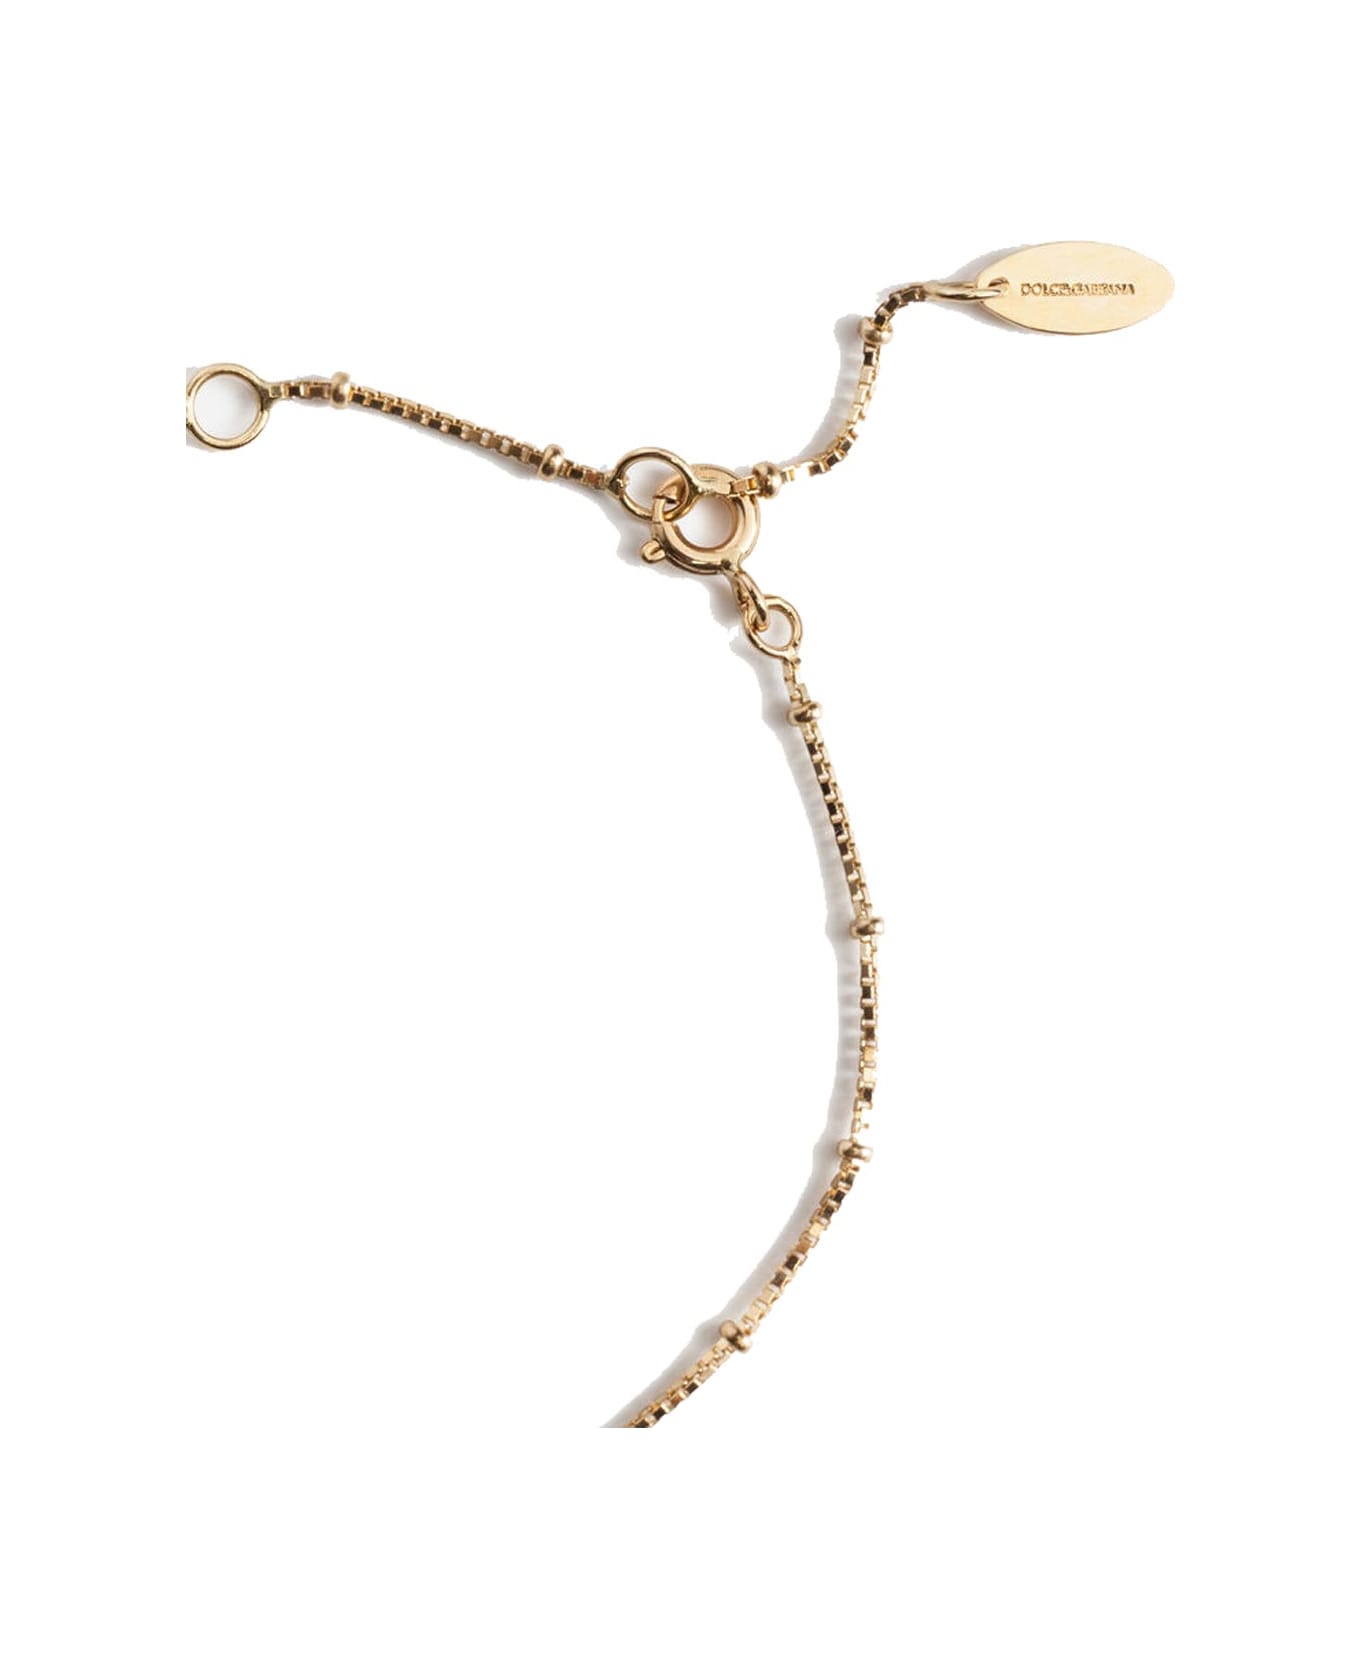 Dolce Front & Gabbana Bracelet With Heart Charm - Gold